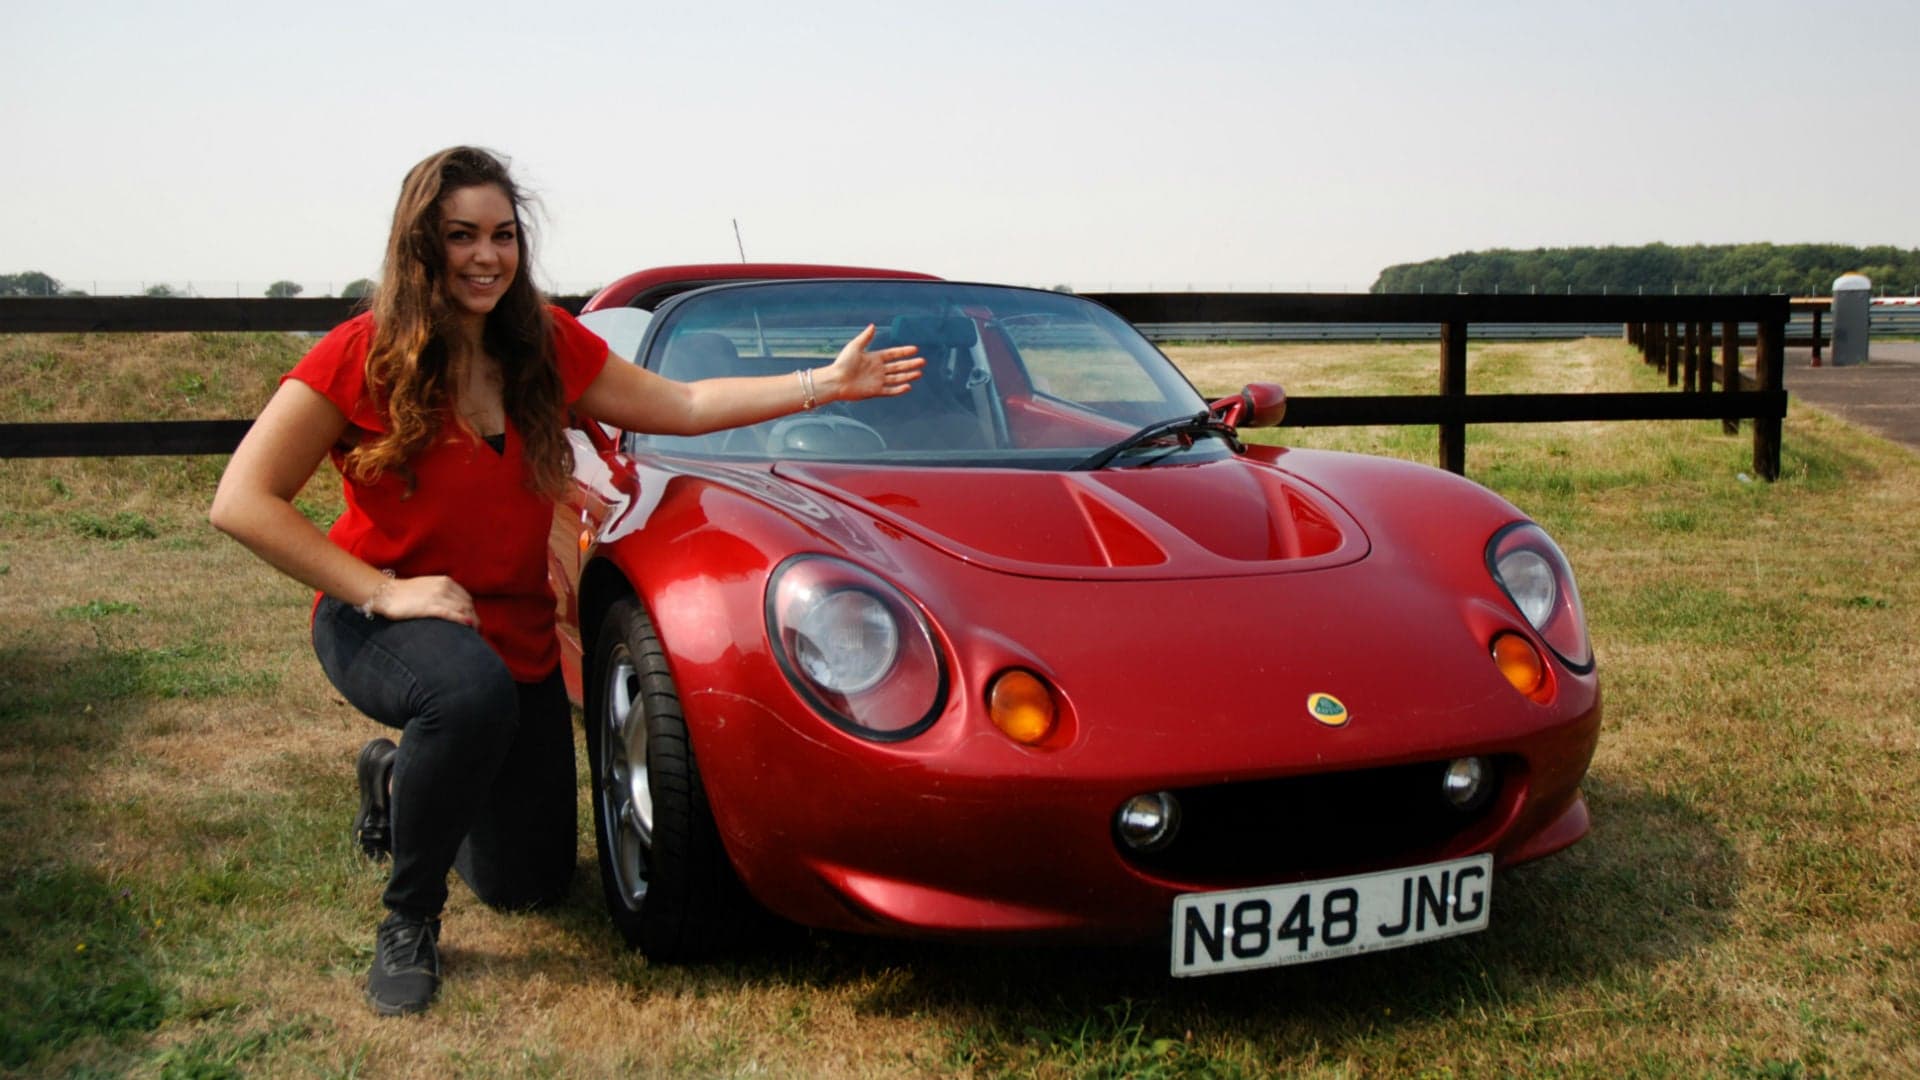 The Lotus Elise Reunites With the Woman It’s Named After